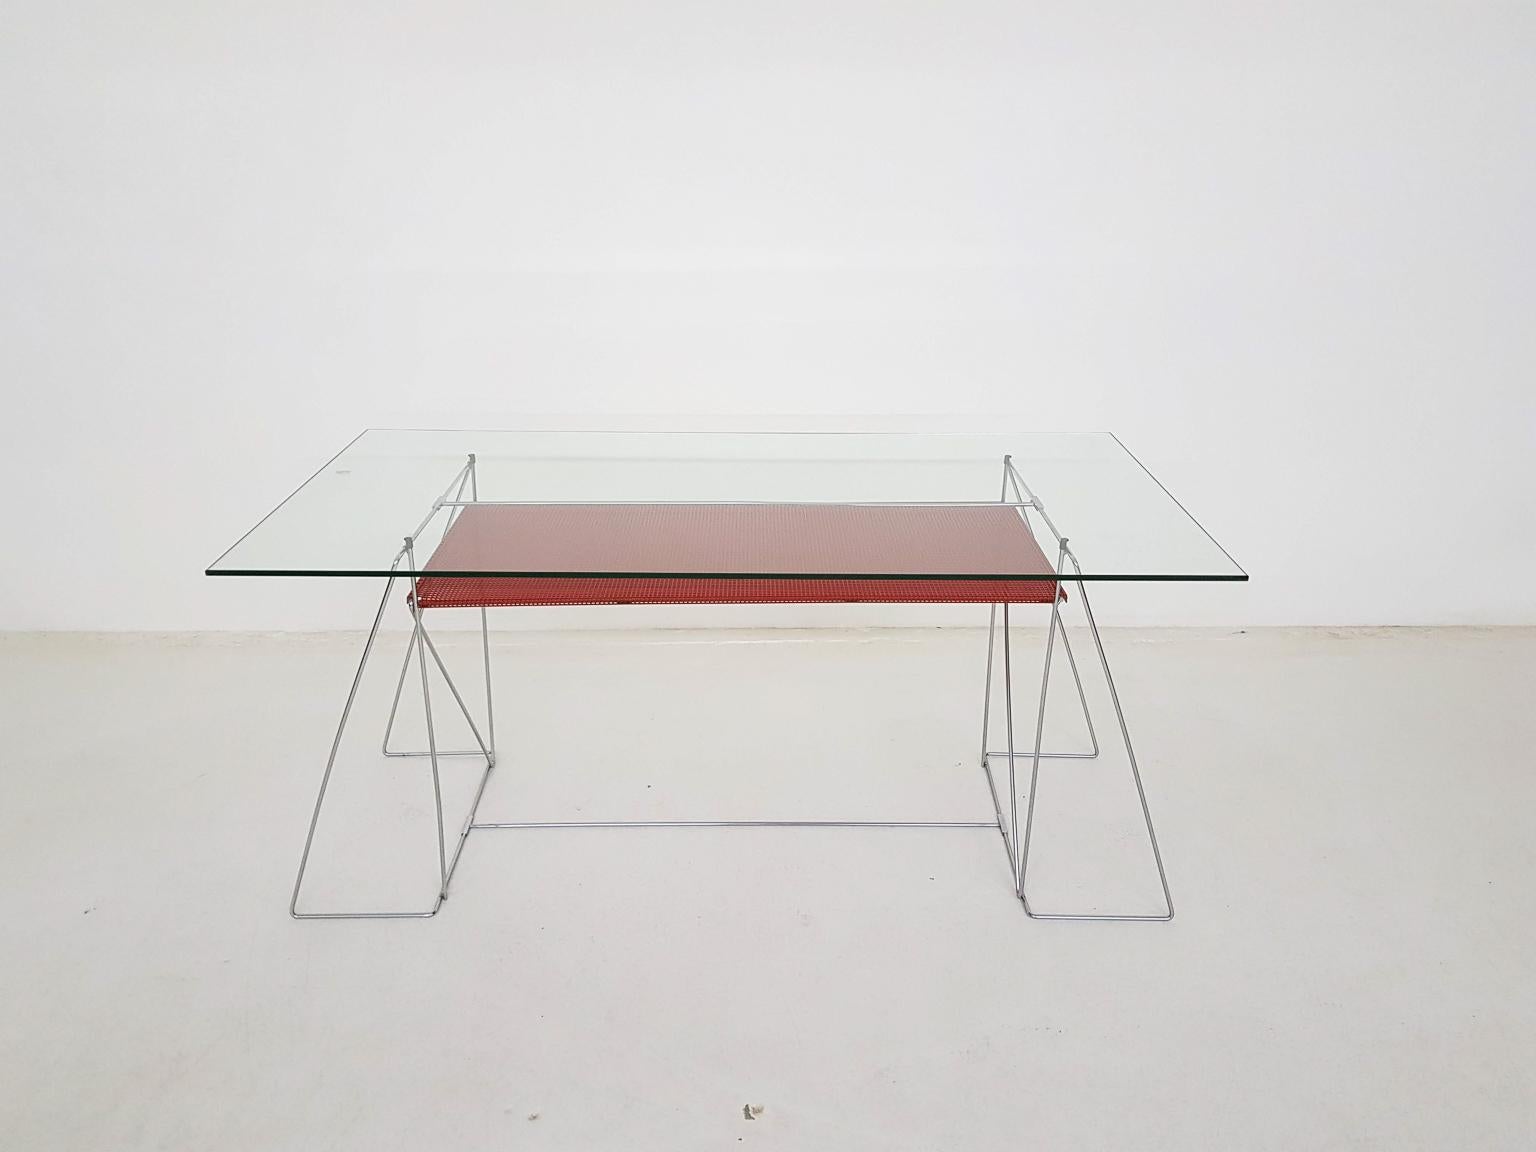 Danish modern X-Line desk or dining table by Niels Jørgen Haugesen for Hybodan, made and designed in Denmark in 1977.

Geometric Scandinavian Modern wire frame dining table or desk. This Danish table is made of a metal frame with a glass top and a